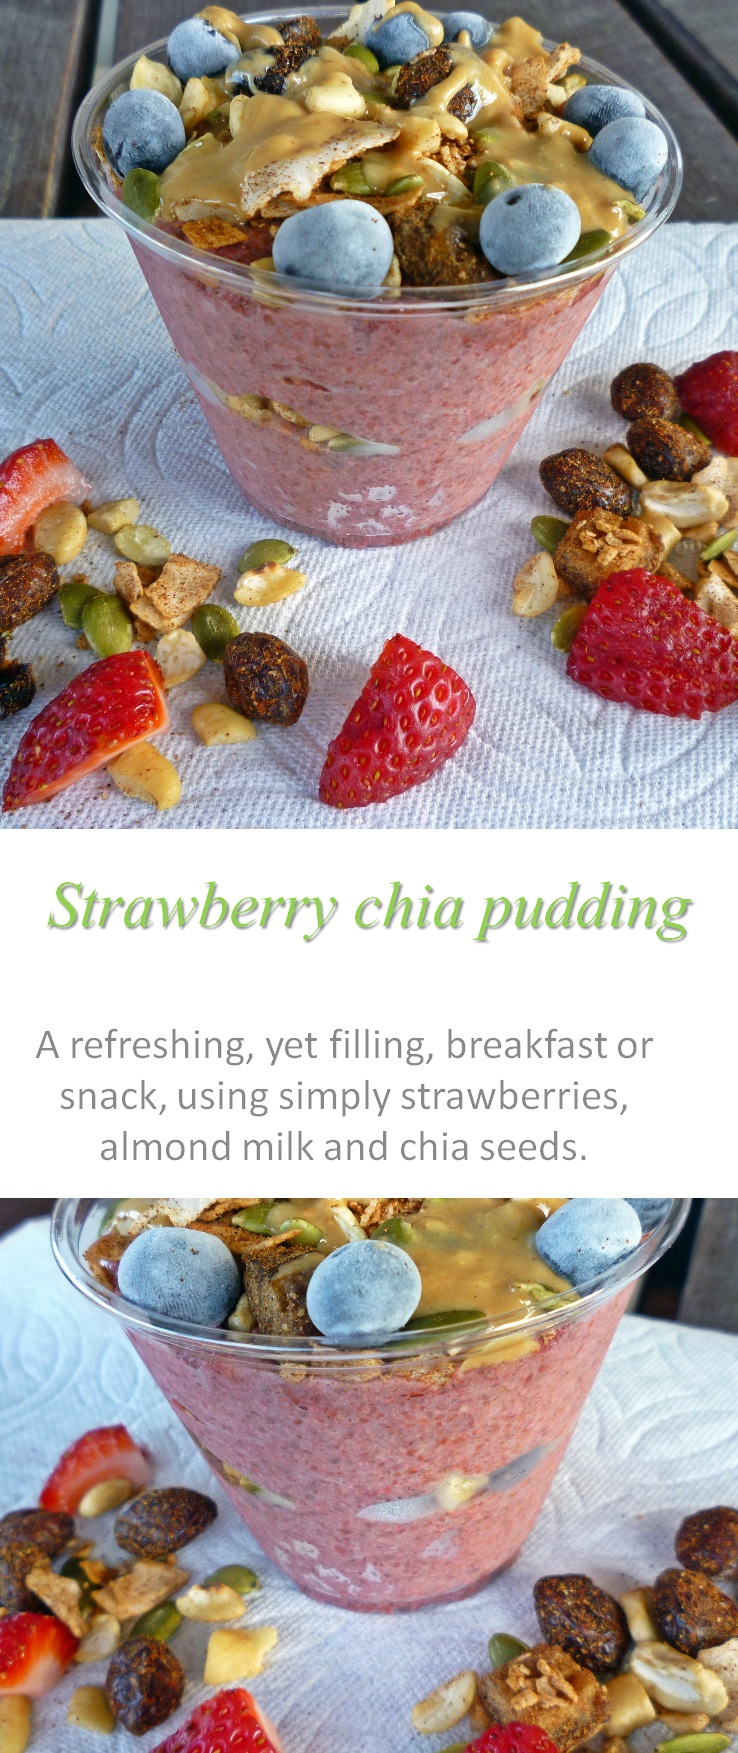 A refreshing breakfast, this strawberry chia pudding, topped with trail mix and nut butter, will keep you full for ages! #chiapudding